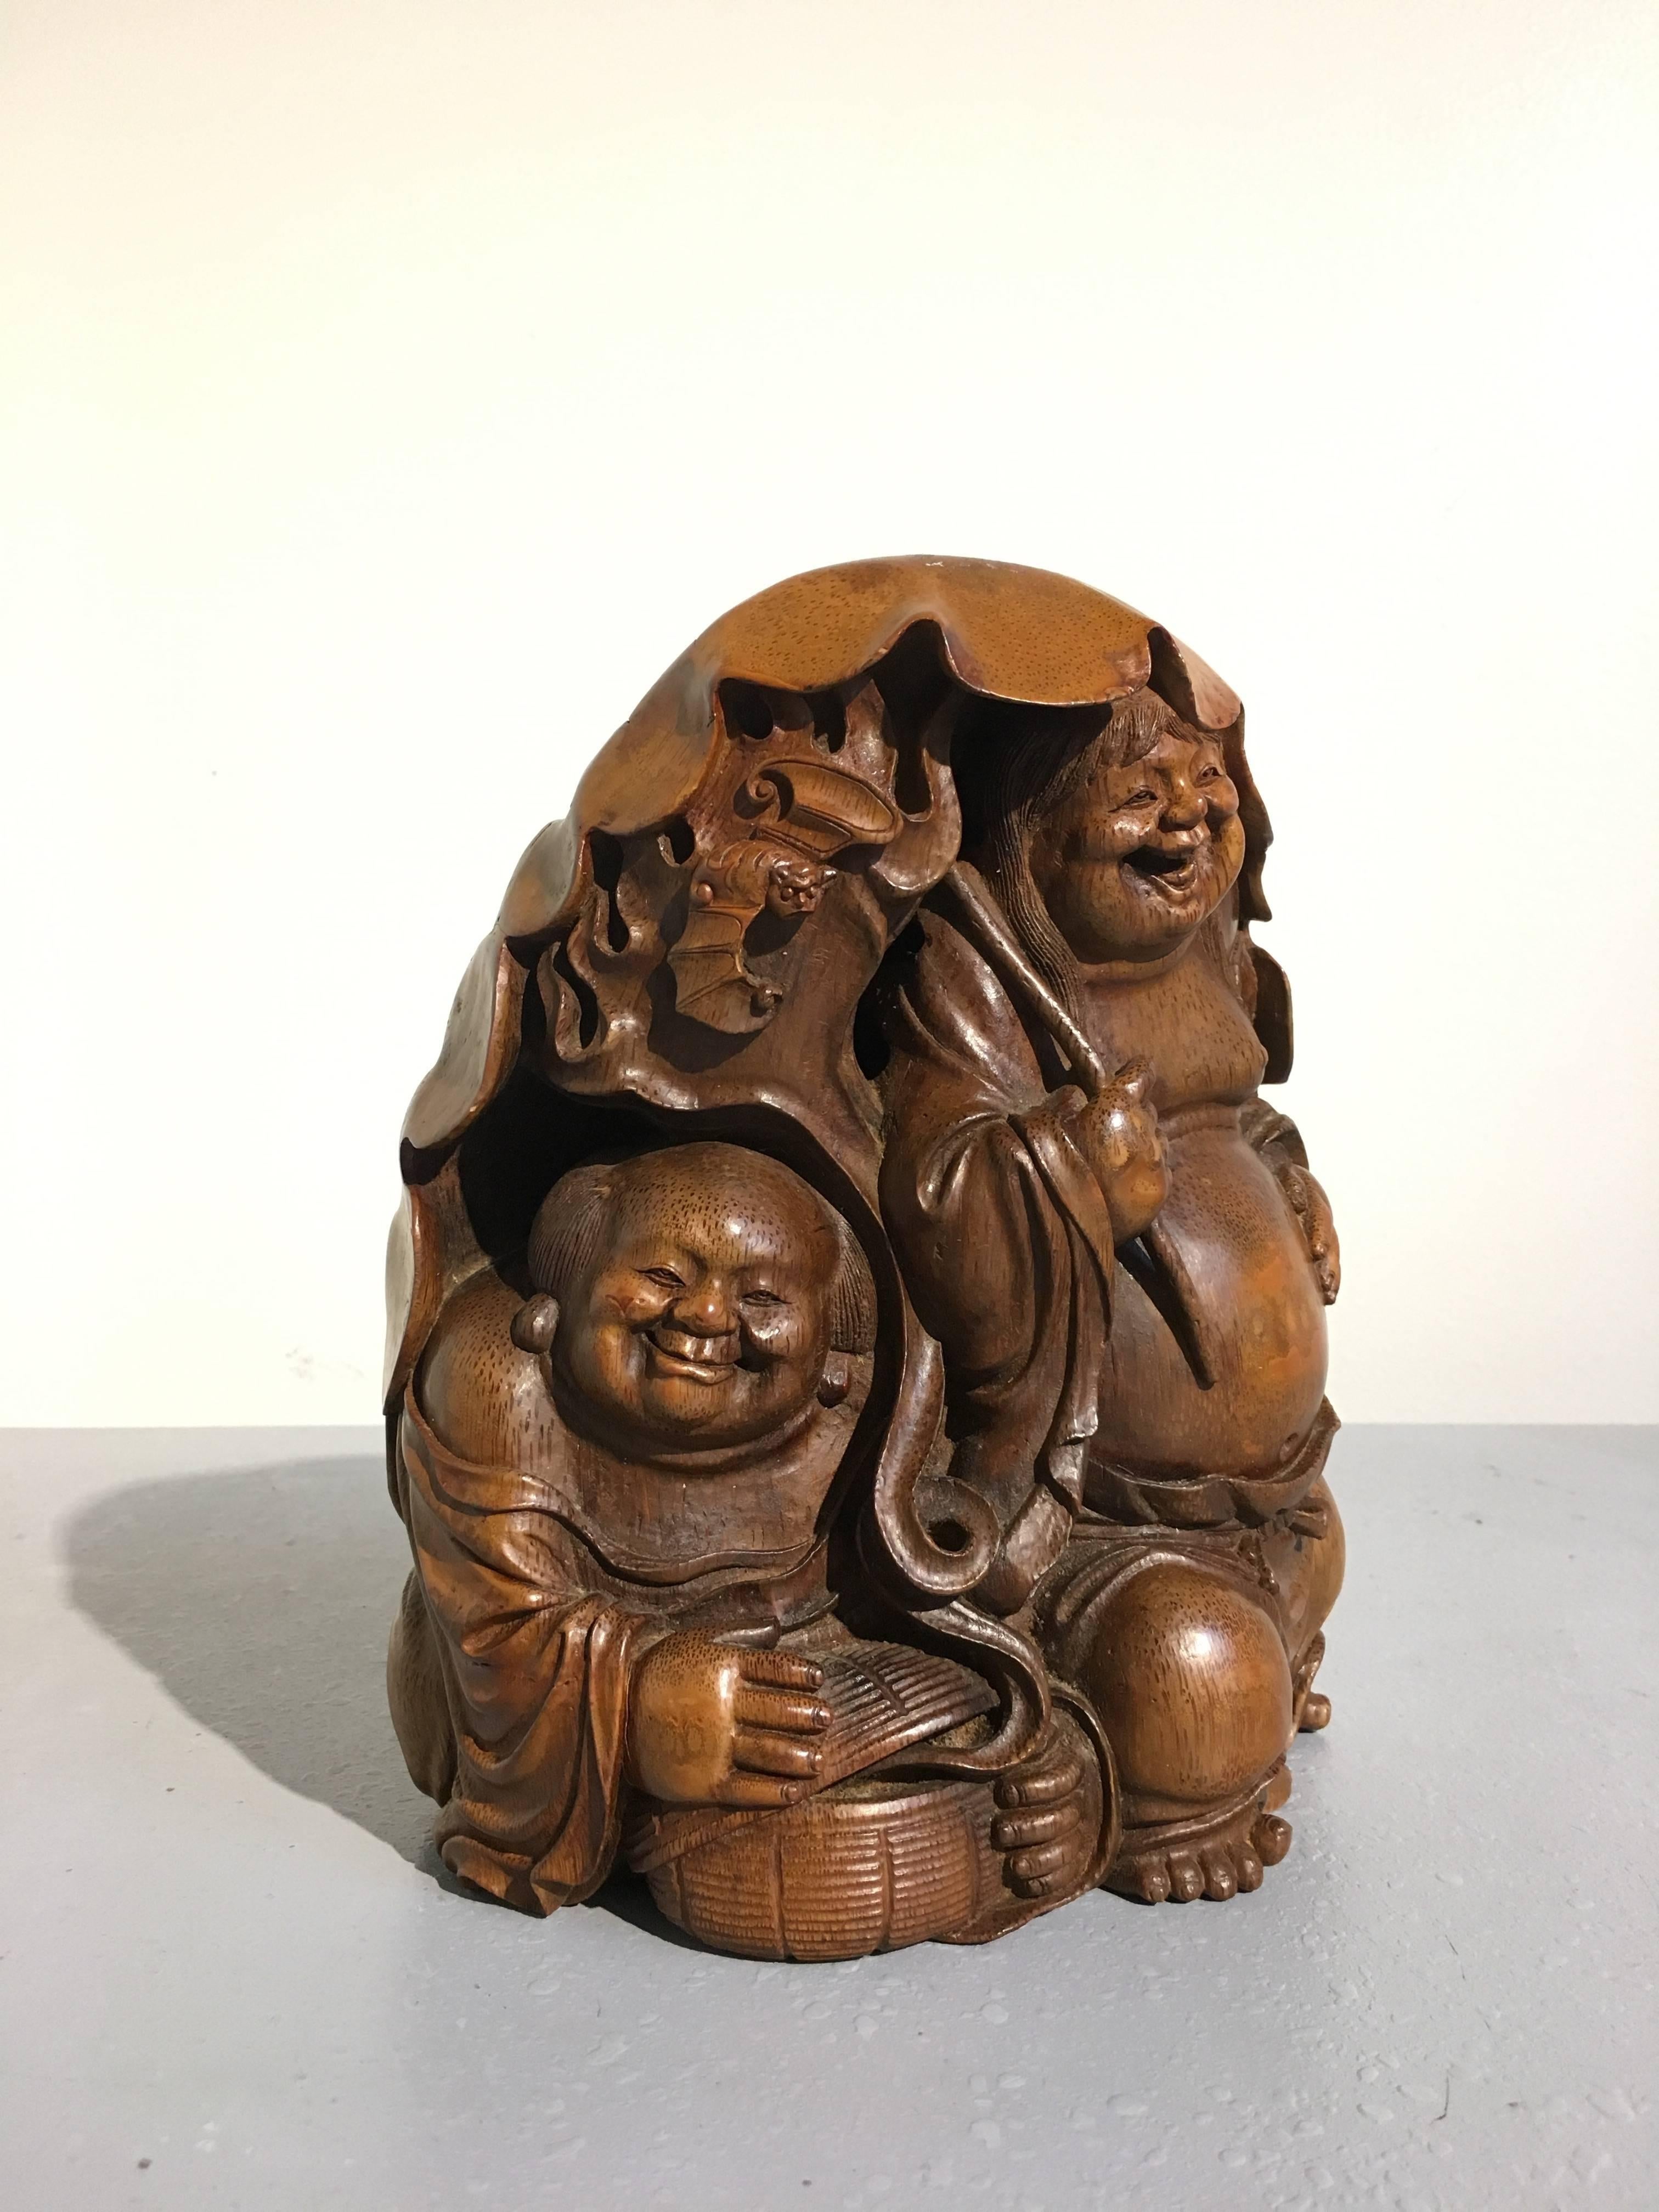 A wonderful Chinese bamboo figural carving featuring the Taoist immortal twins of eternal youth, known as the HeHe ErXian, Qing dynasty, 19th century.

Finely carved from a single large section of bamboo root, the twins of mirth and harmony, often